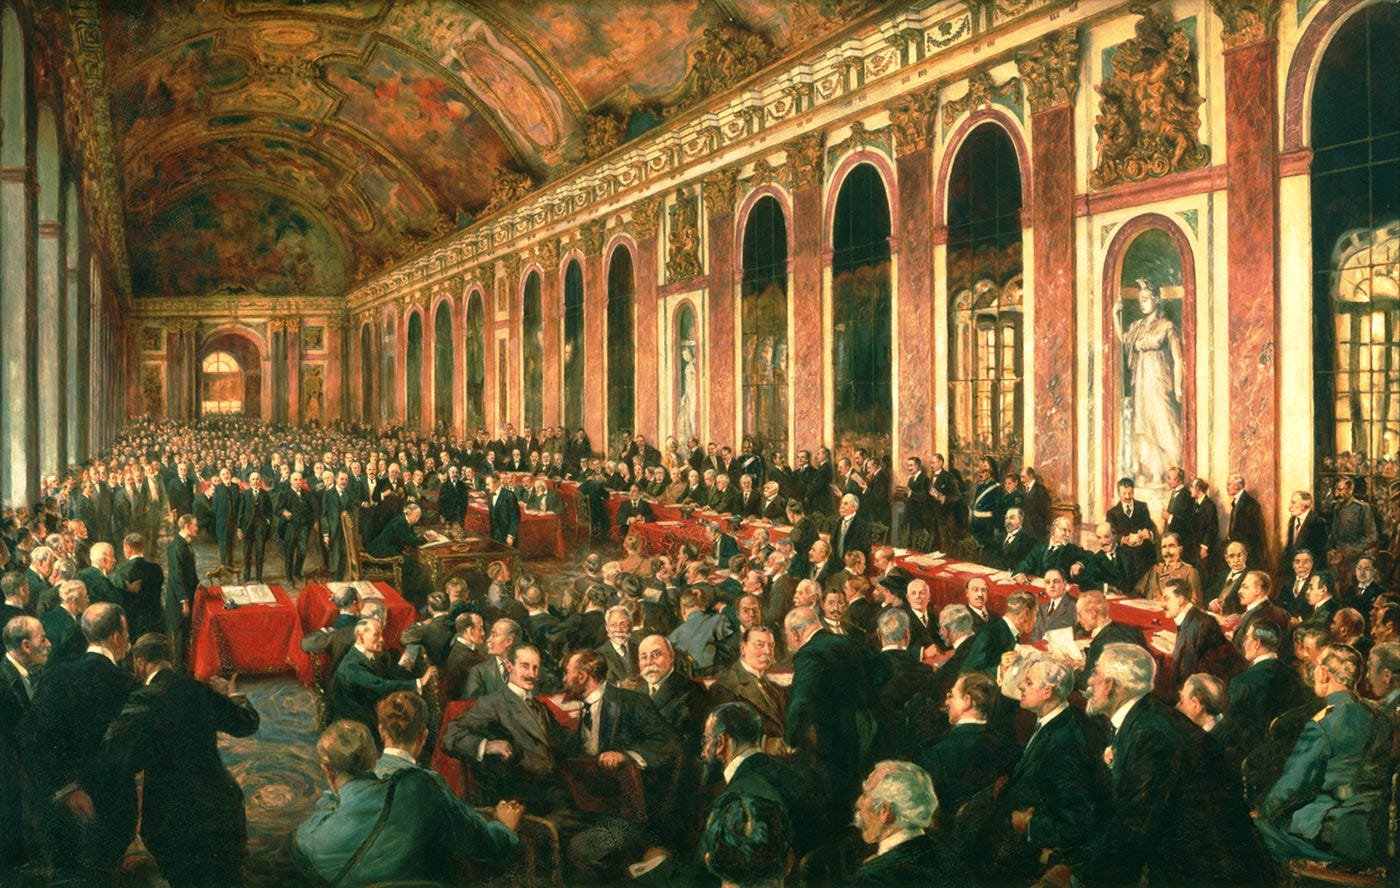 ART and ARCHITECTURE, mainly: The Versailles Peace Treaty (1919) was ...